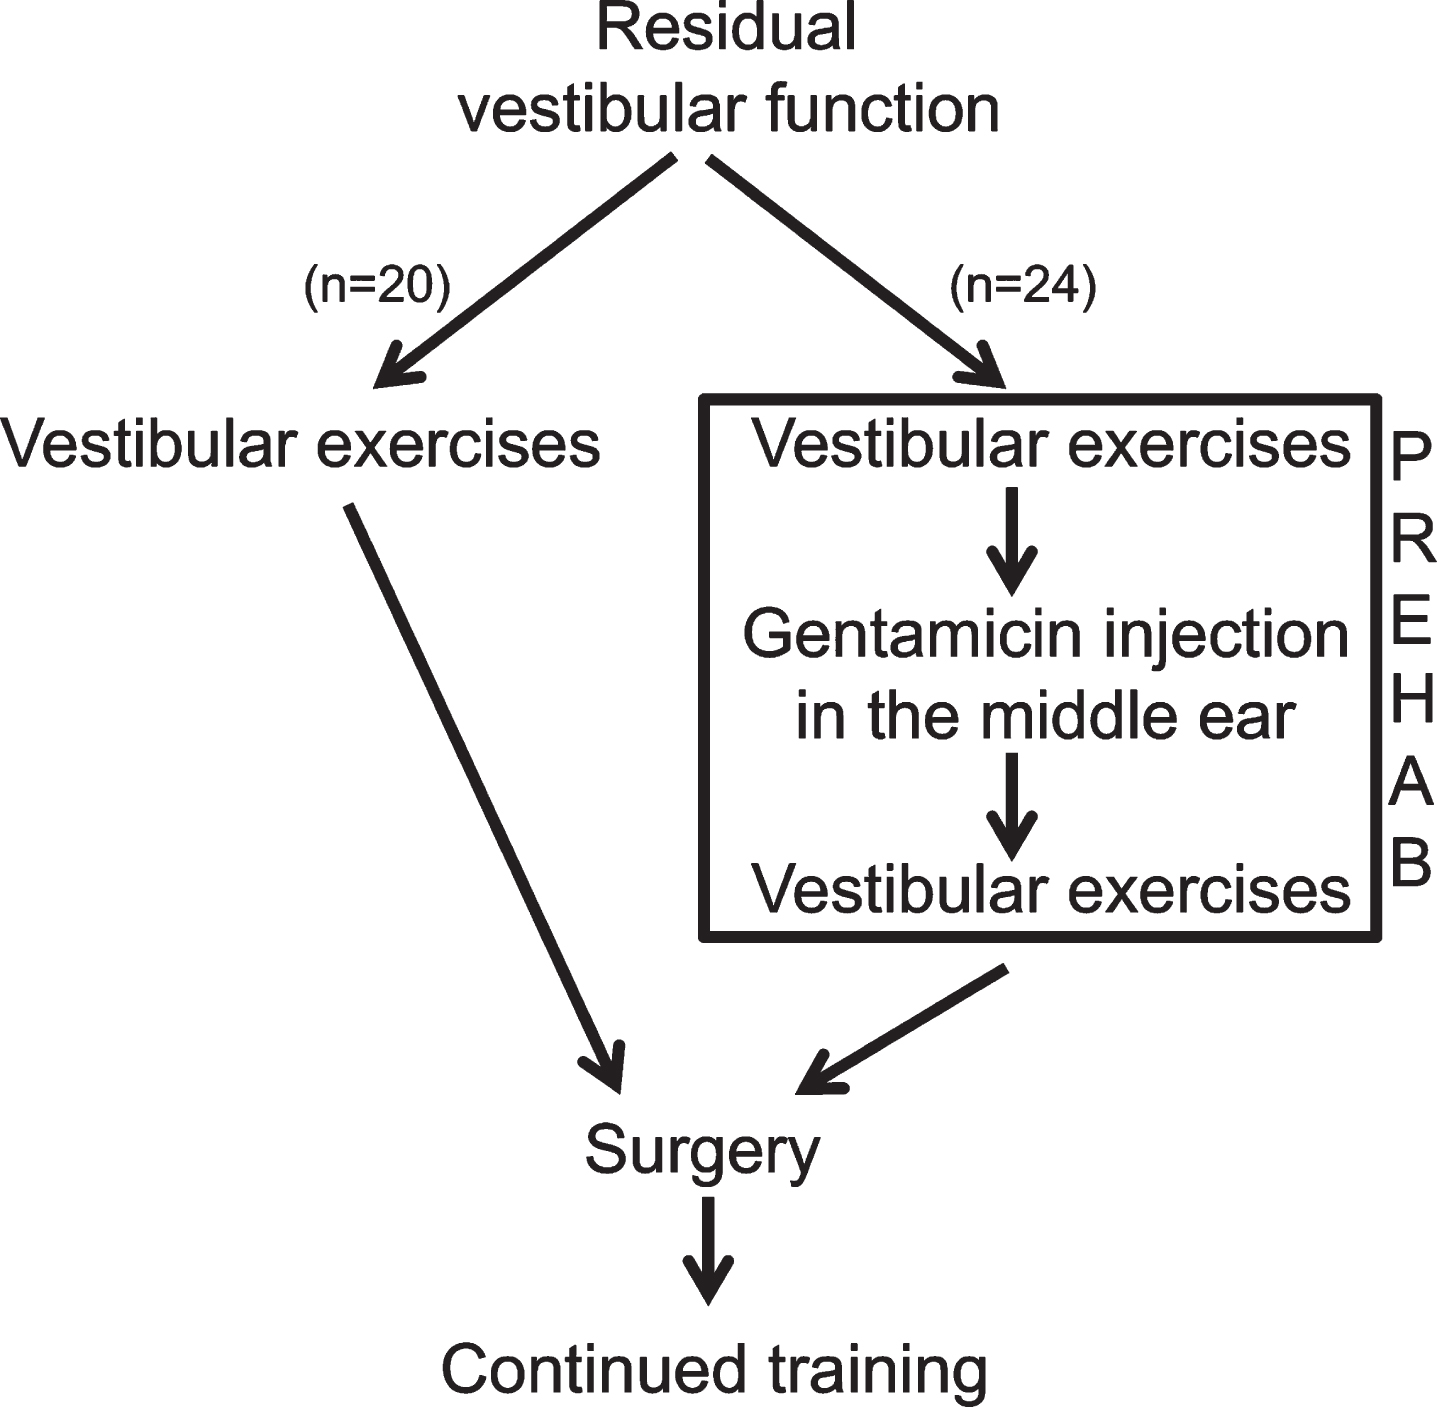 The algorithm for the present study also defining the vestibular PREHAB protocol. n = the participants in each arm for the present study.